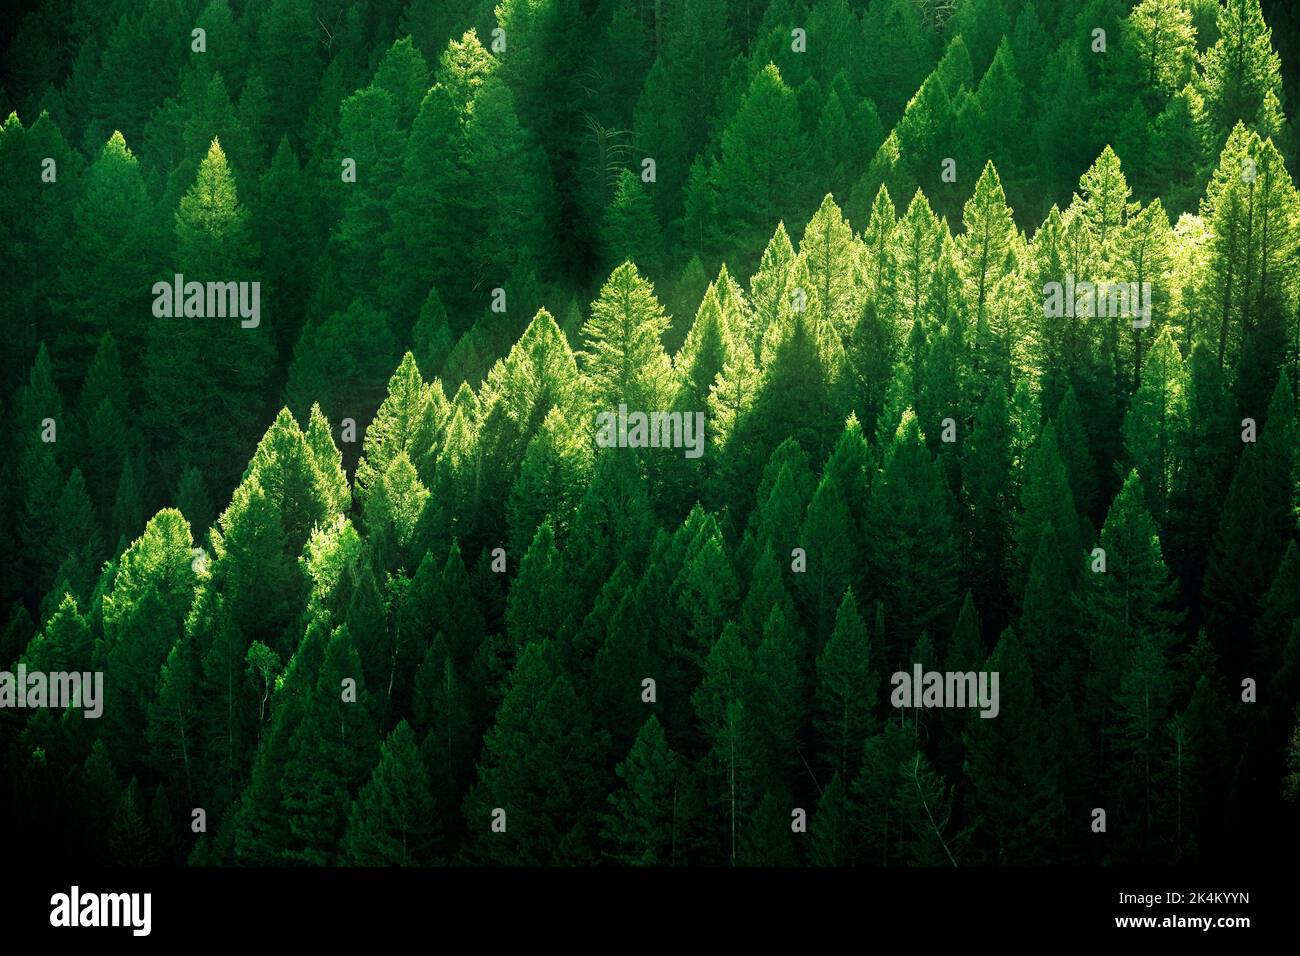 Forest of pine trees on mountainside in early morning light luch green growth Stock Photo